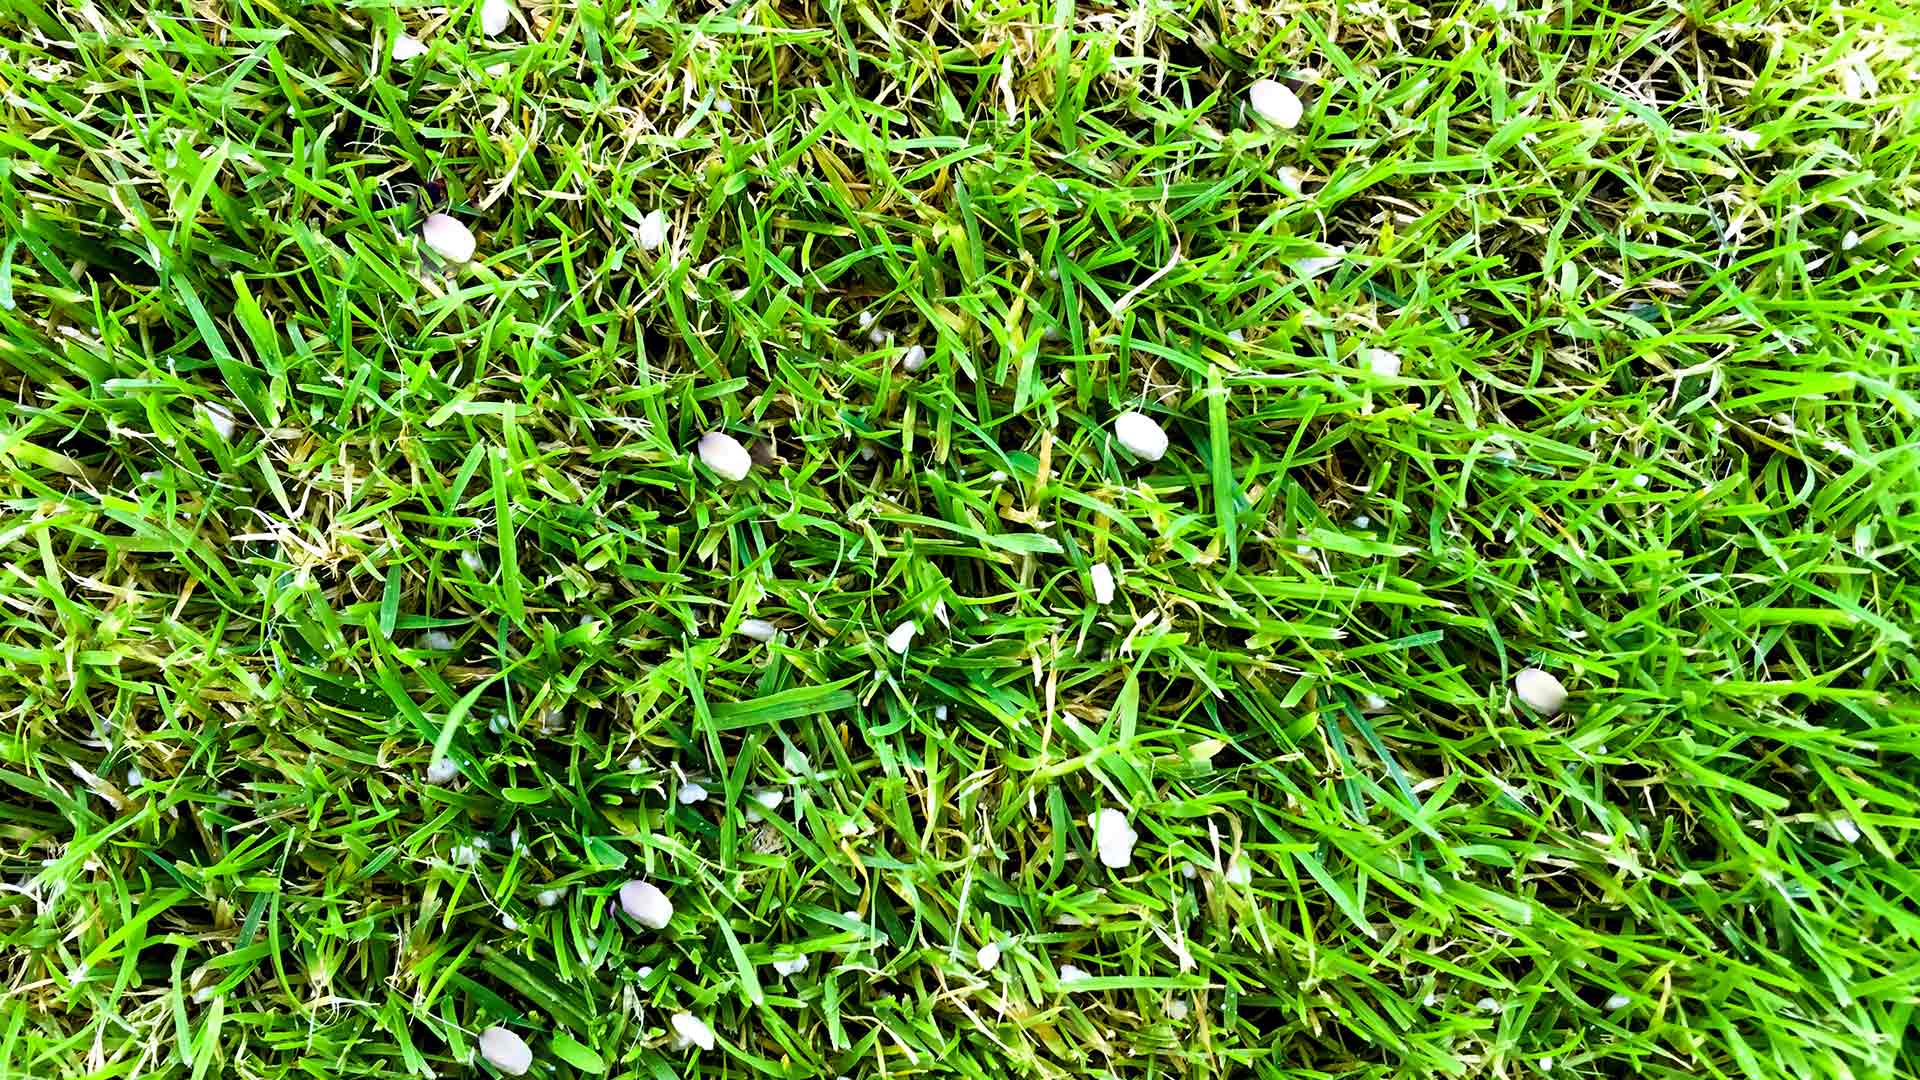 Does Your Lawn Need a Lime Treatment This Fall?